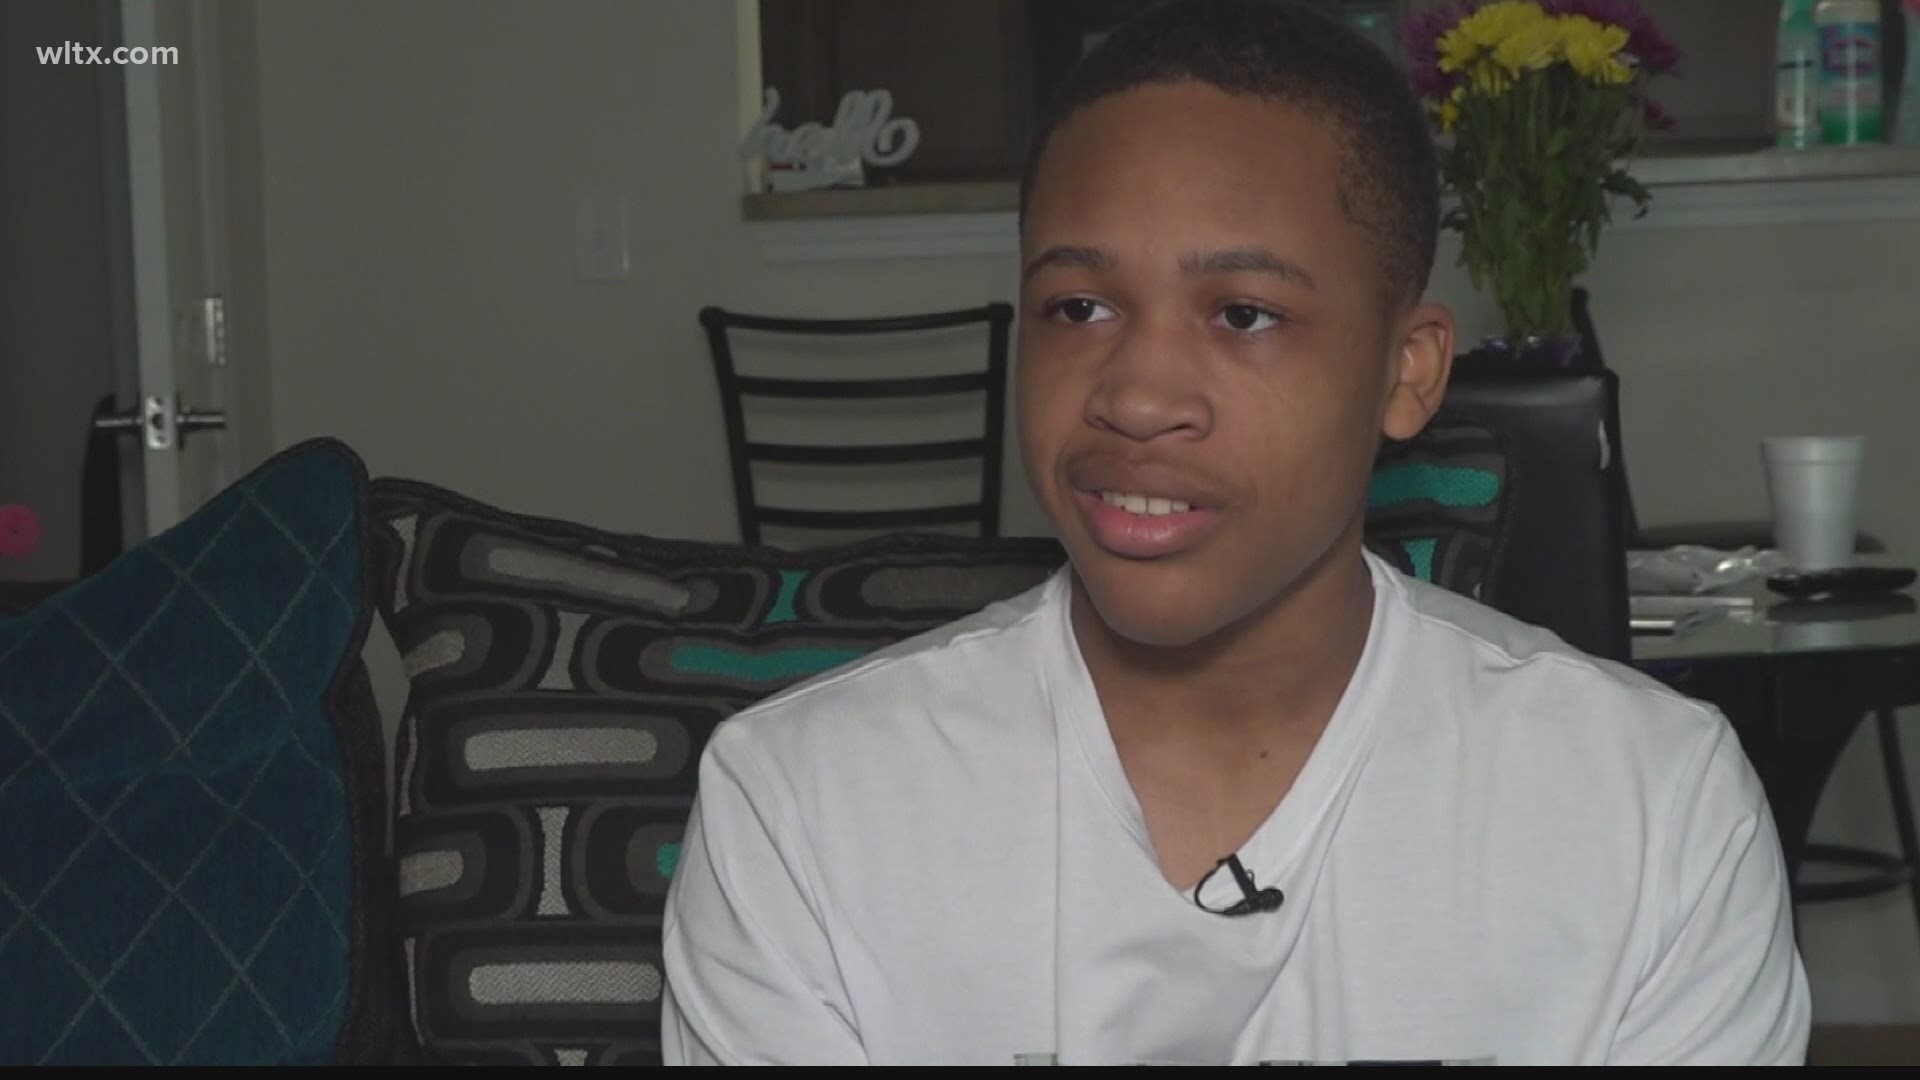 14-year-old James Pearson will graduate from Dent Middle School next week with 'author' on his resume.